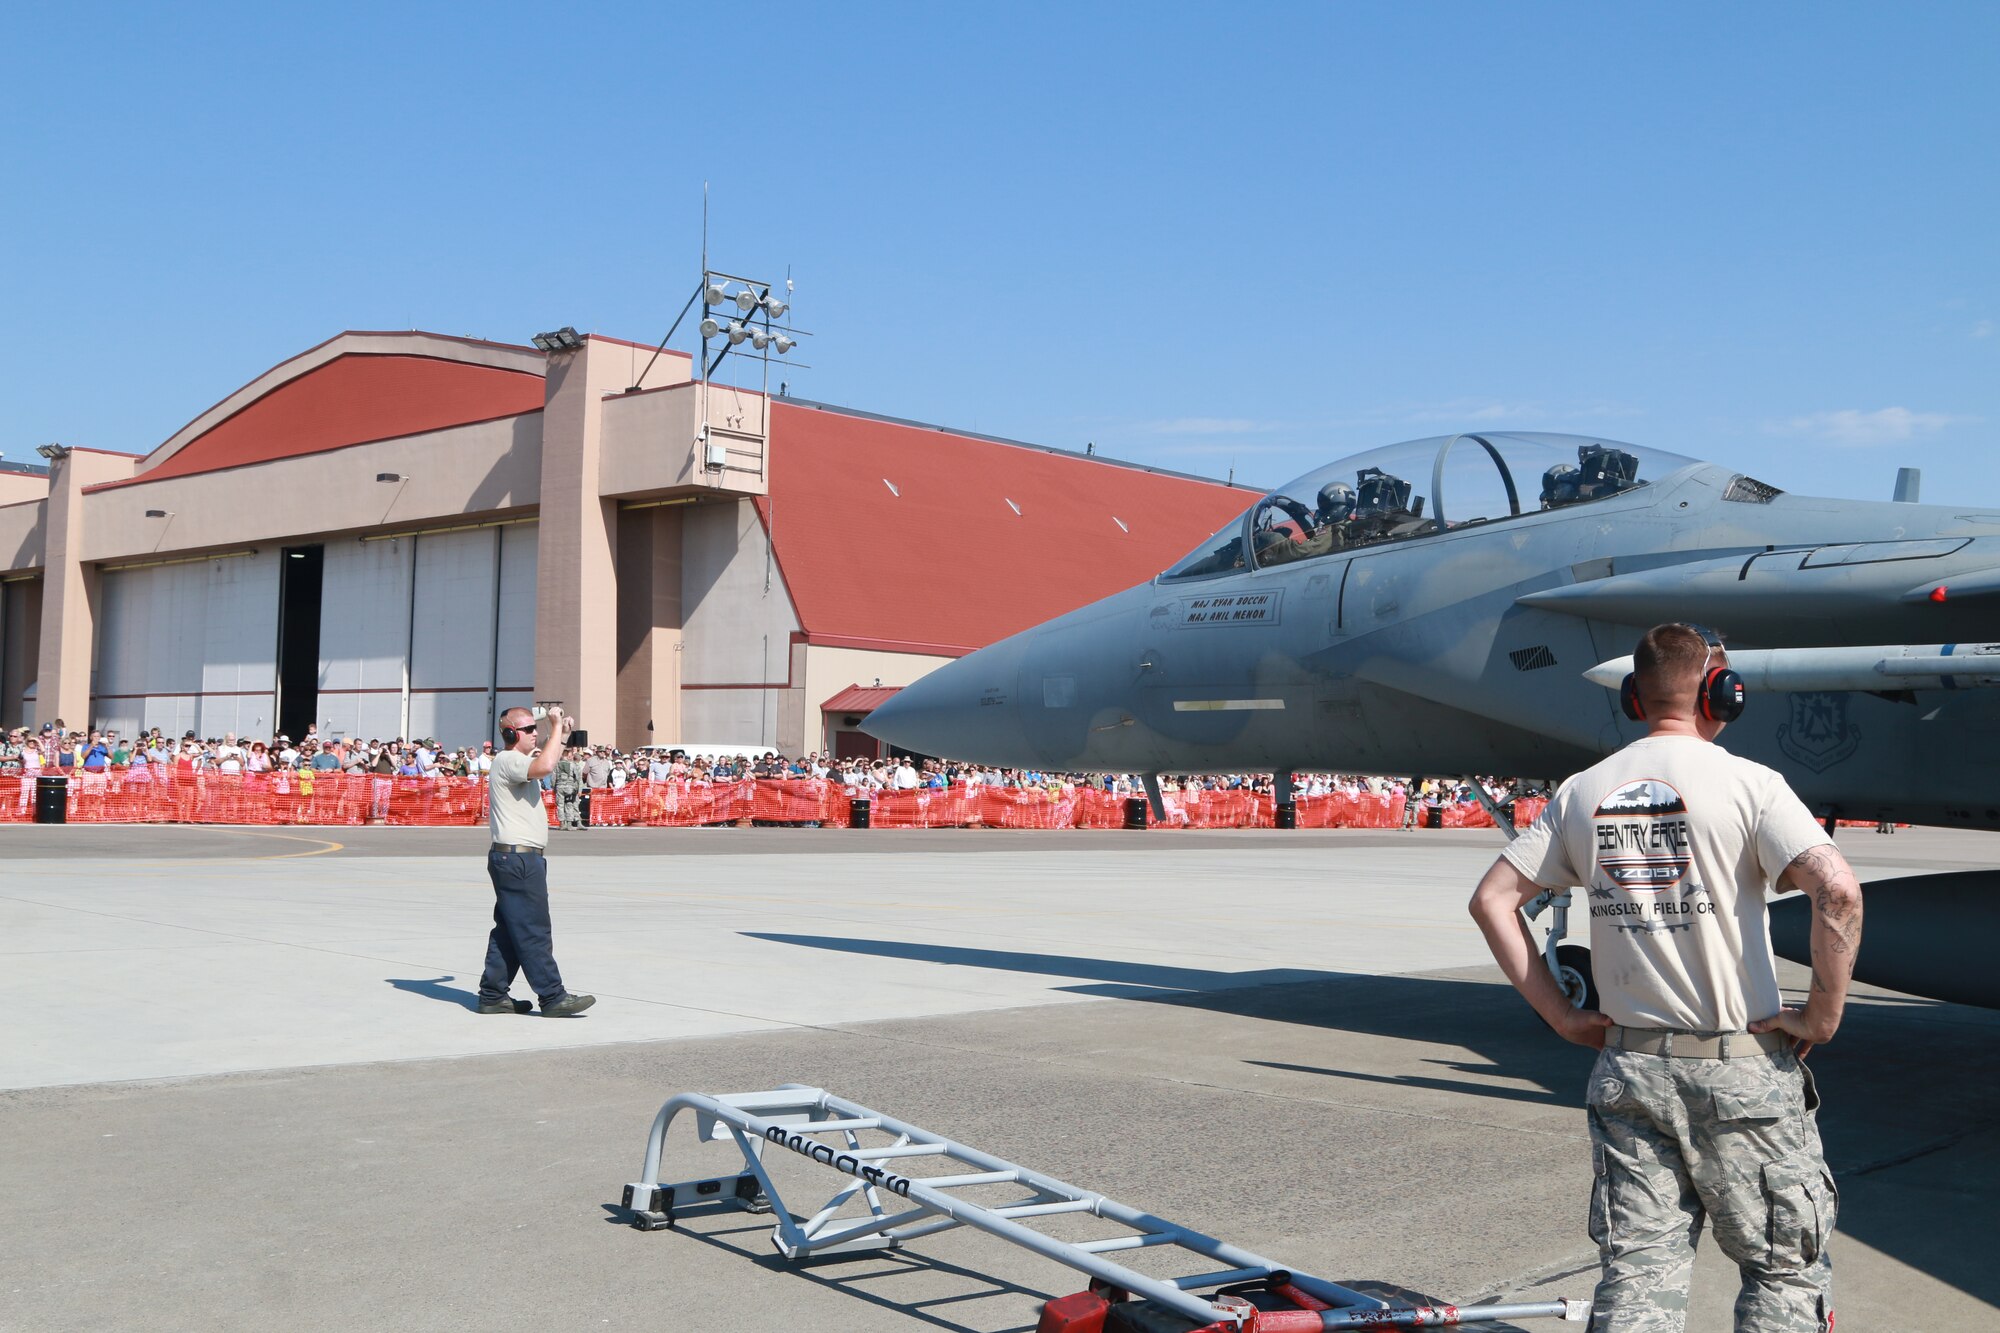 Members of the community watch as 173rd Fighter Wing F-15 crew chiefs launch an F-15 Eagle during the base Open House held at Kingsley Field, Klamath Falls, Ore. Aug. 1, 2015 in conjunction with the Sentry Eagle exercise.  Sentry Eagle is a multiforce exercise hosted by the 173rd Fighter Wing, Ore. ANG.  Multiple aircraft from across the country participate in the dissimilar air combat training over a four day period.  (U.S. Air National Guard photo by Master Sgt. Jennifer Shirar/released)